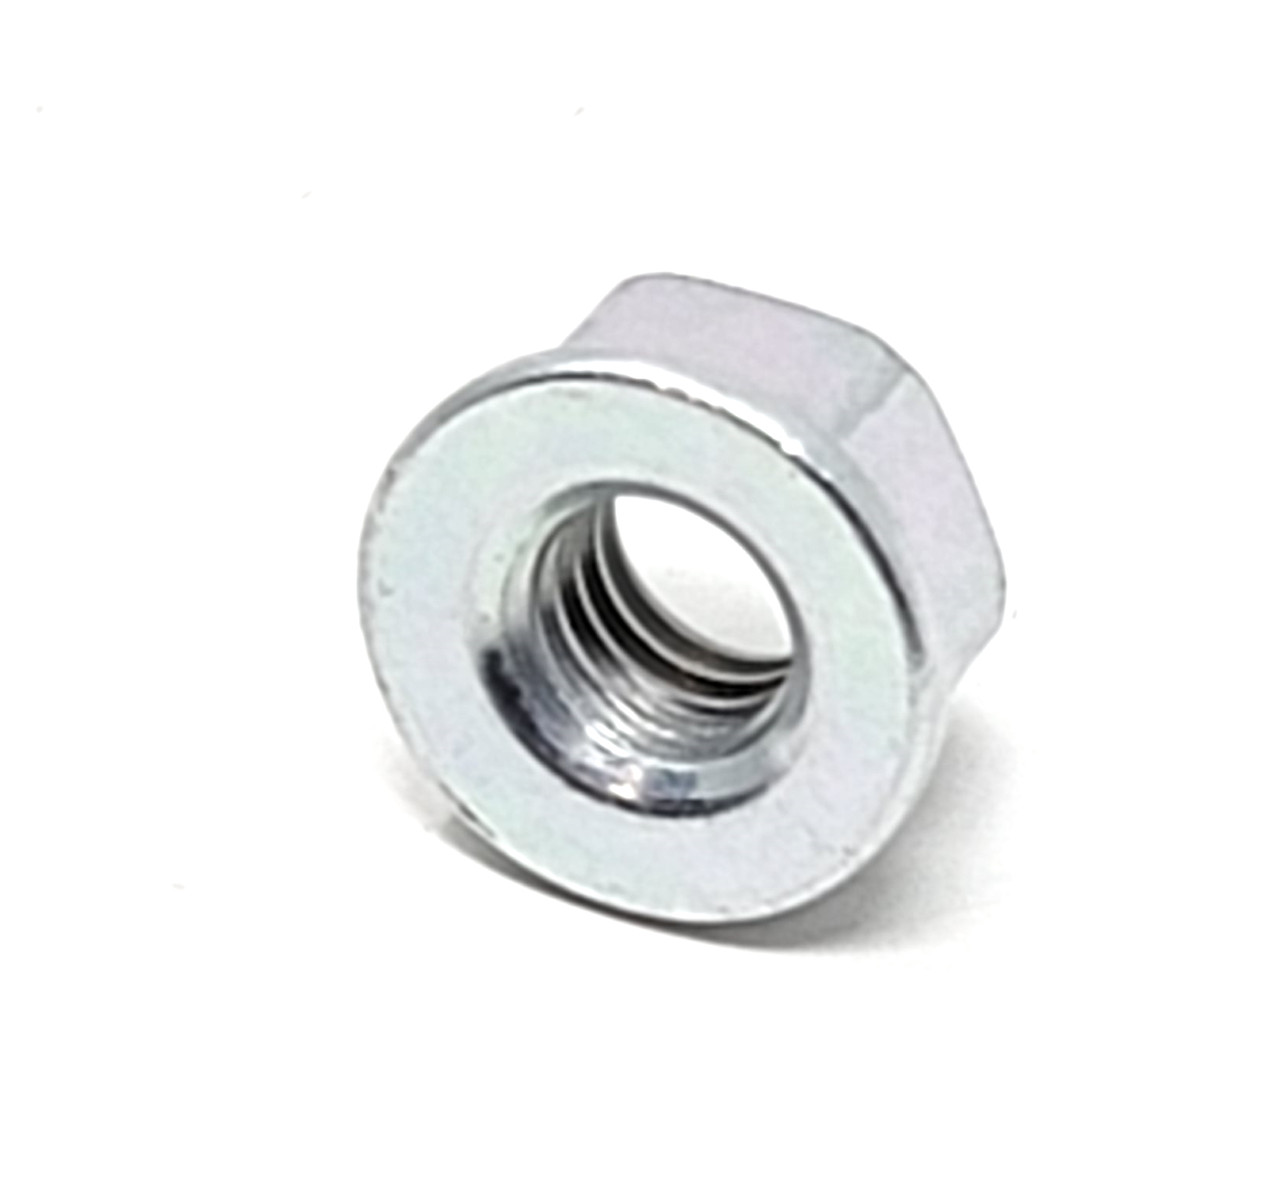 Nut- Toyota M6 X 1.0 Metric Nut For Idle Pulley 90080-17237